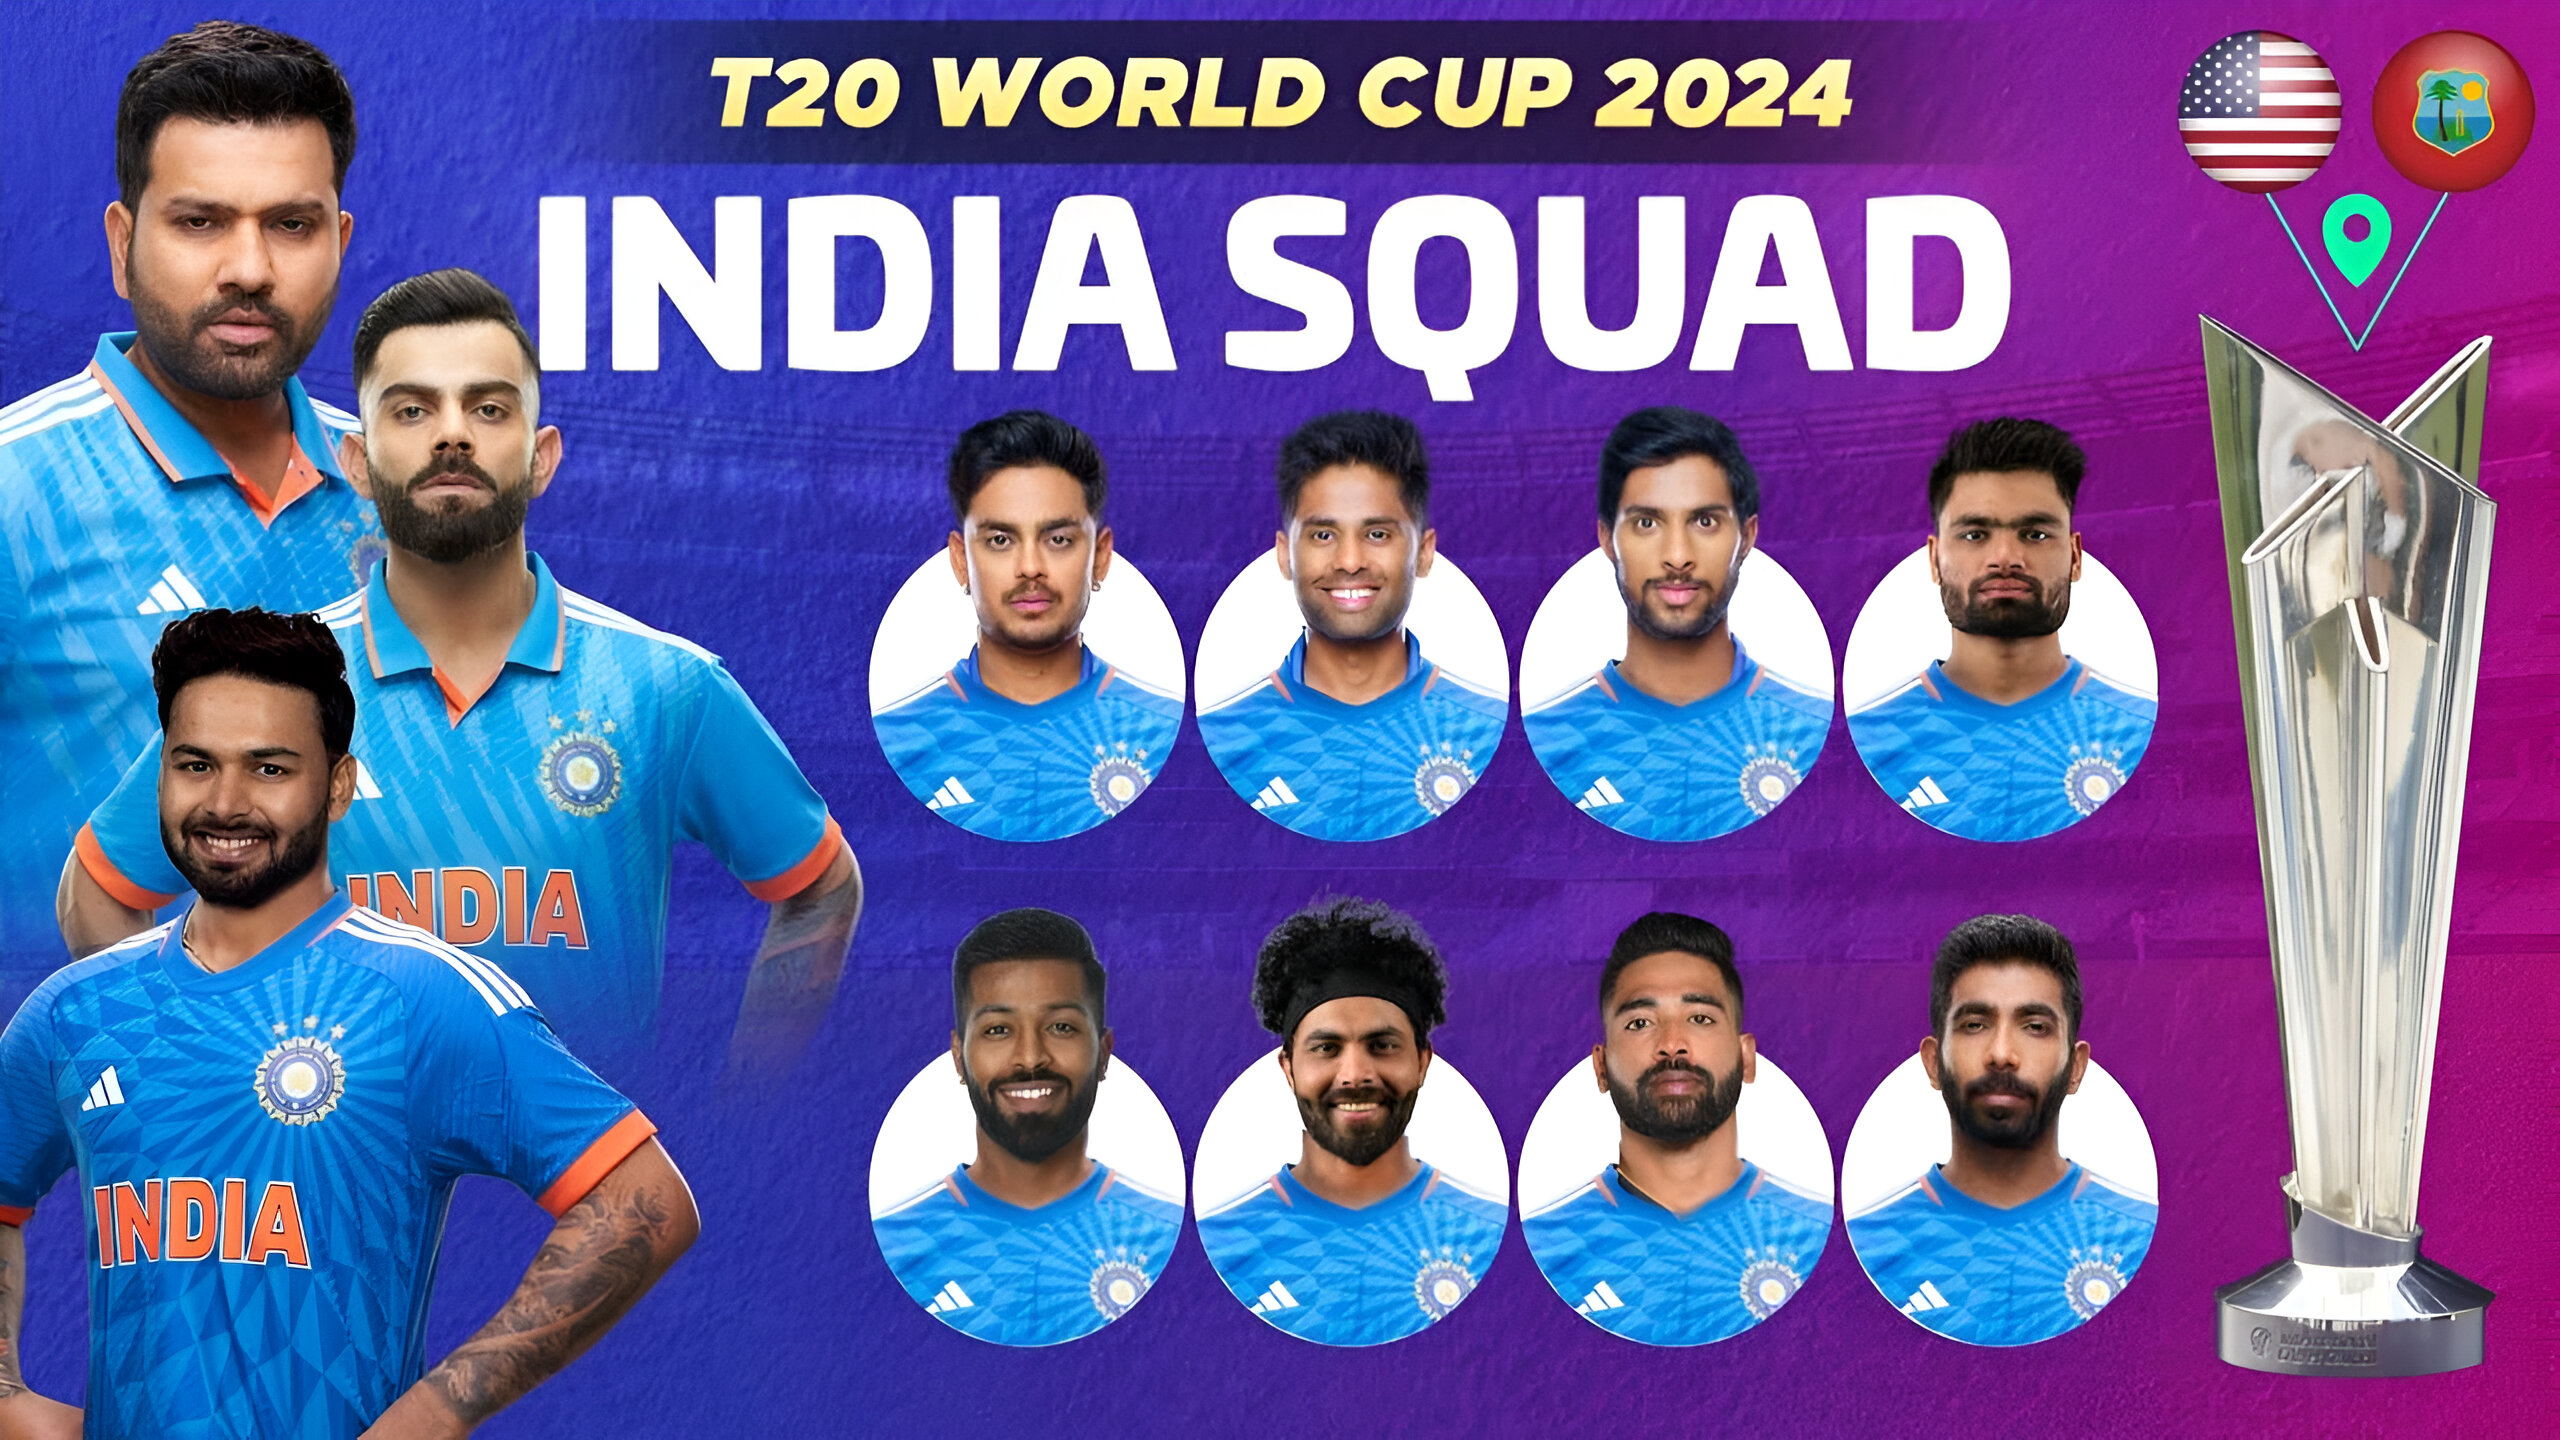 t20 world cup 2024 schedule t20 world cup 2024 date t20 world cup 2024: india t20 world cup 2024 india squad bcci team players list t20 world cup schedule t20 world cup date t20 world cup winners list t20 world cup match